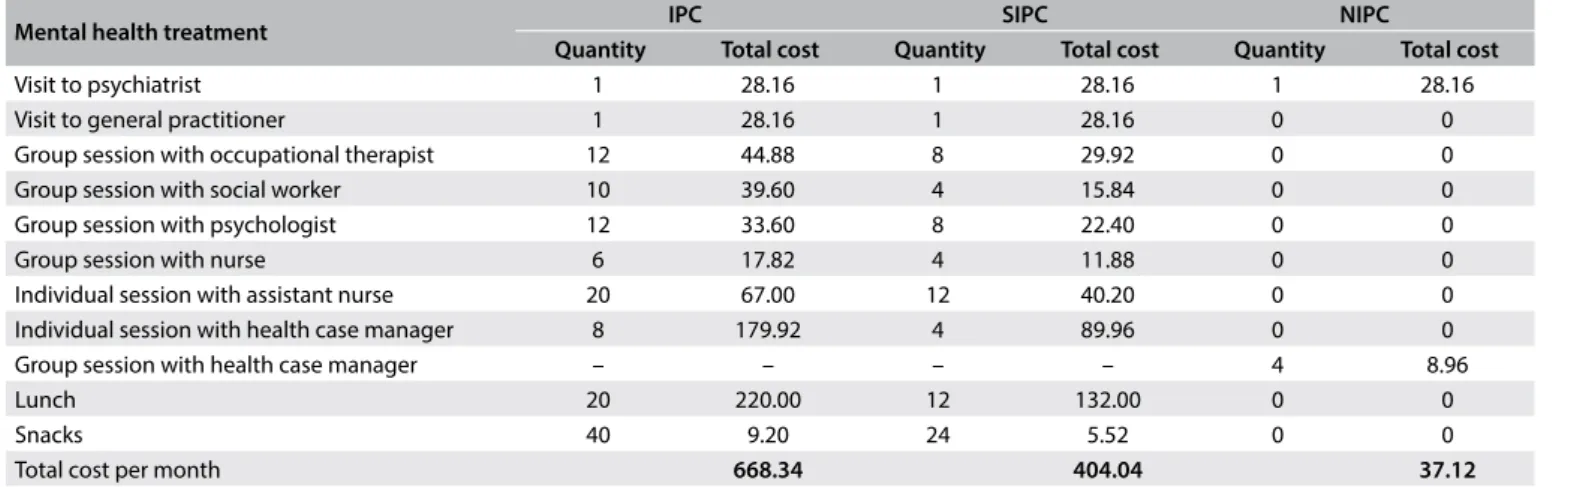 Table 5. One-month package-of-care costs per capita in Brazilian reais (BRL)